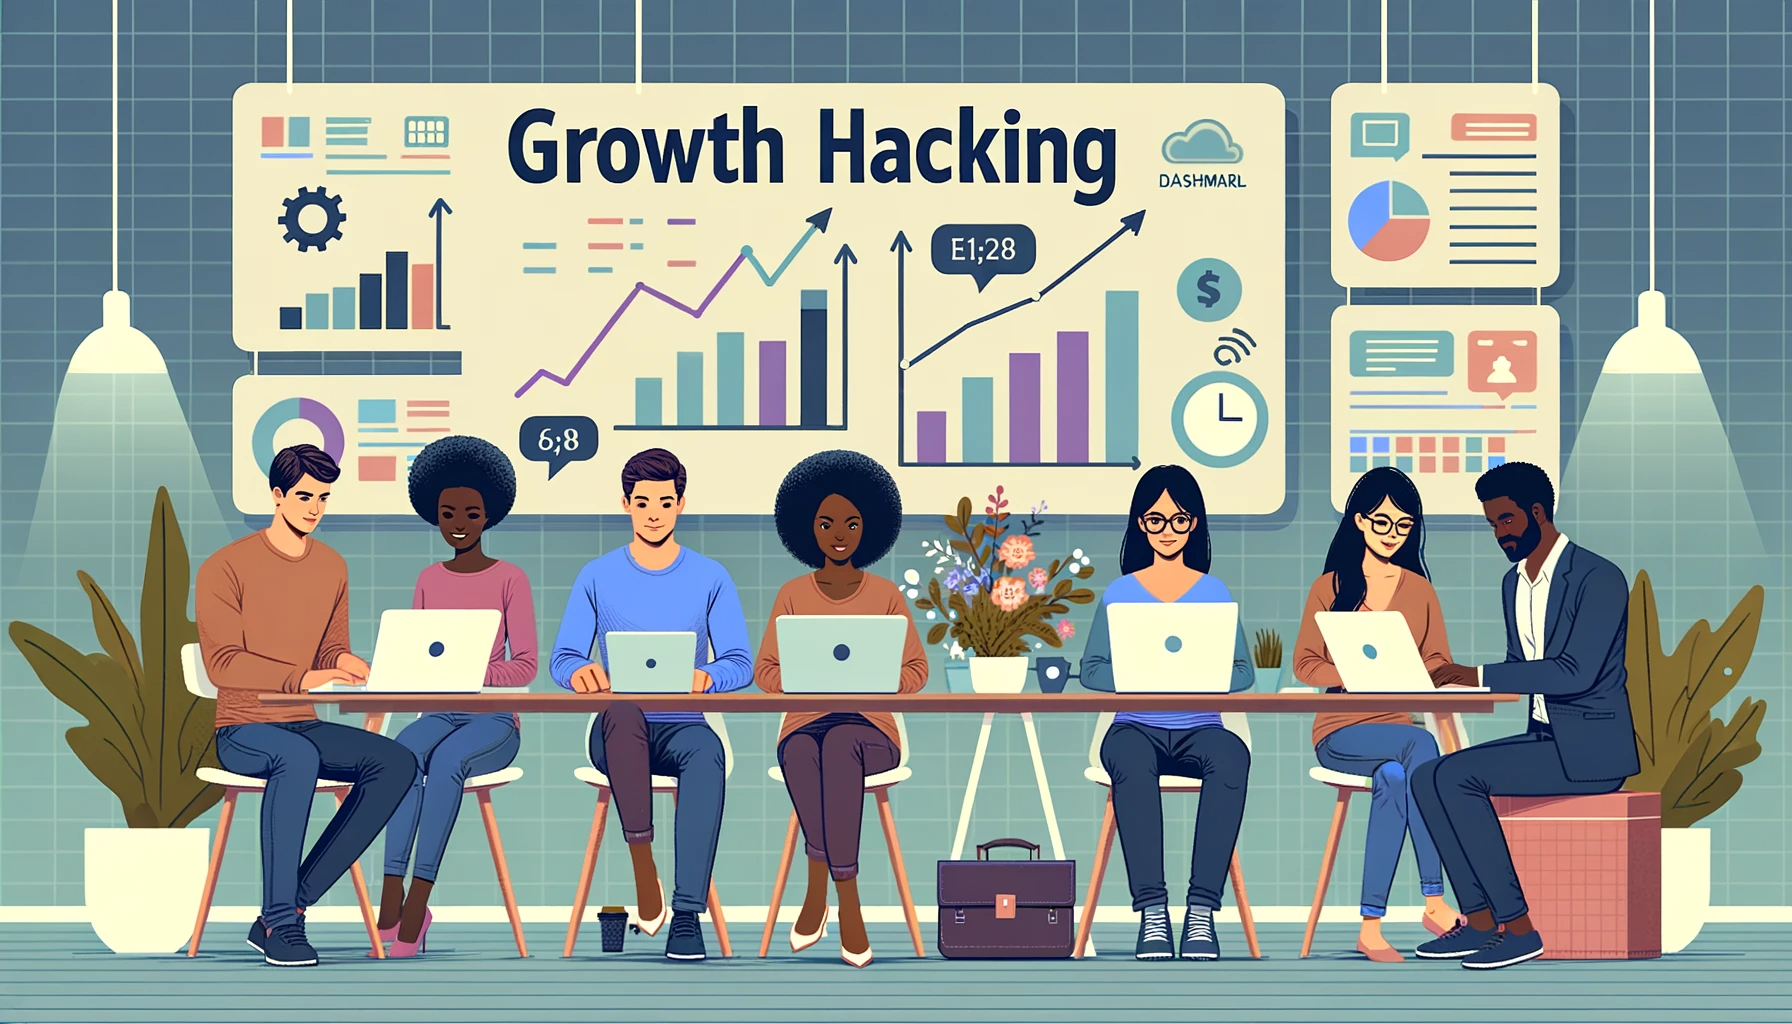 Growth Hacking team